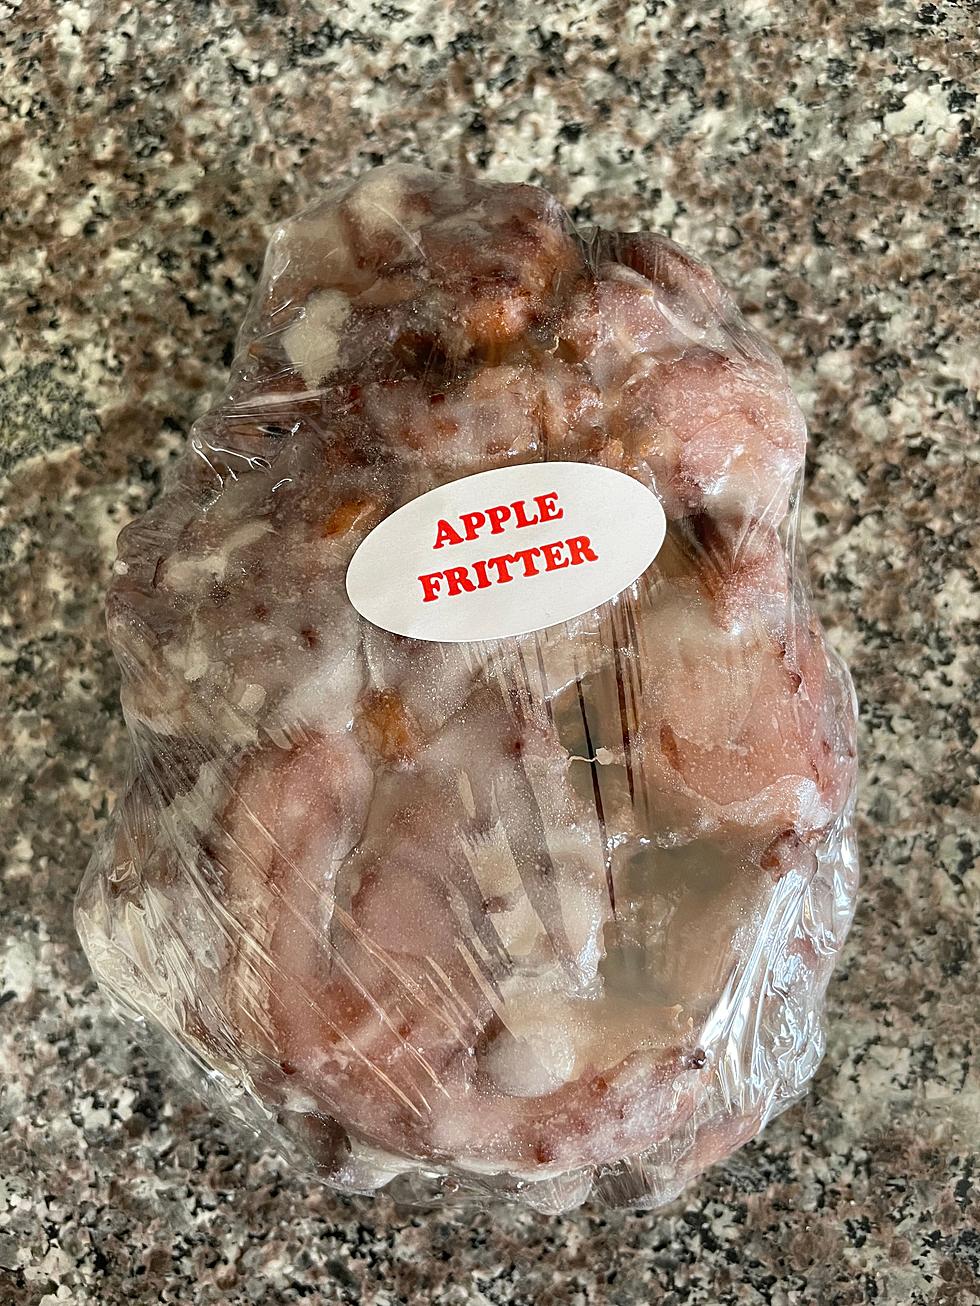 'Poem' Professes My Love for Apple Fritters Found at Stewart's